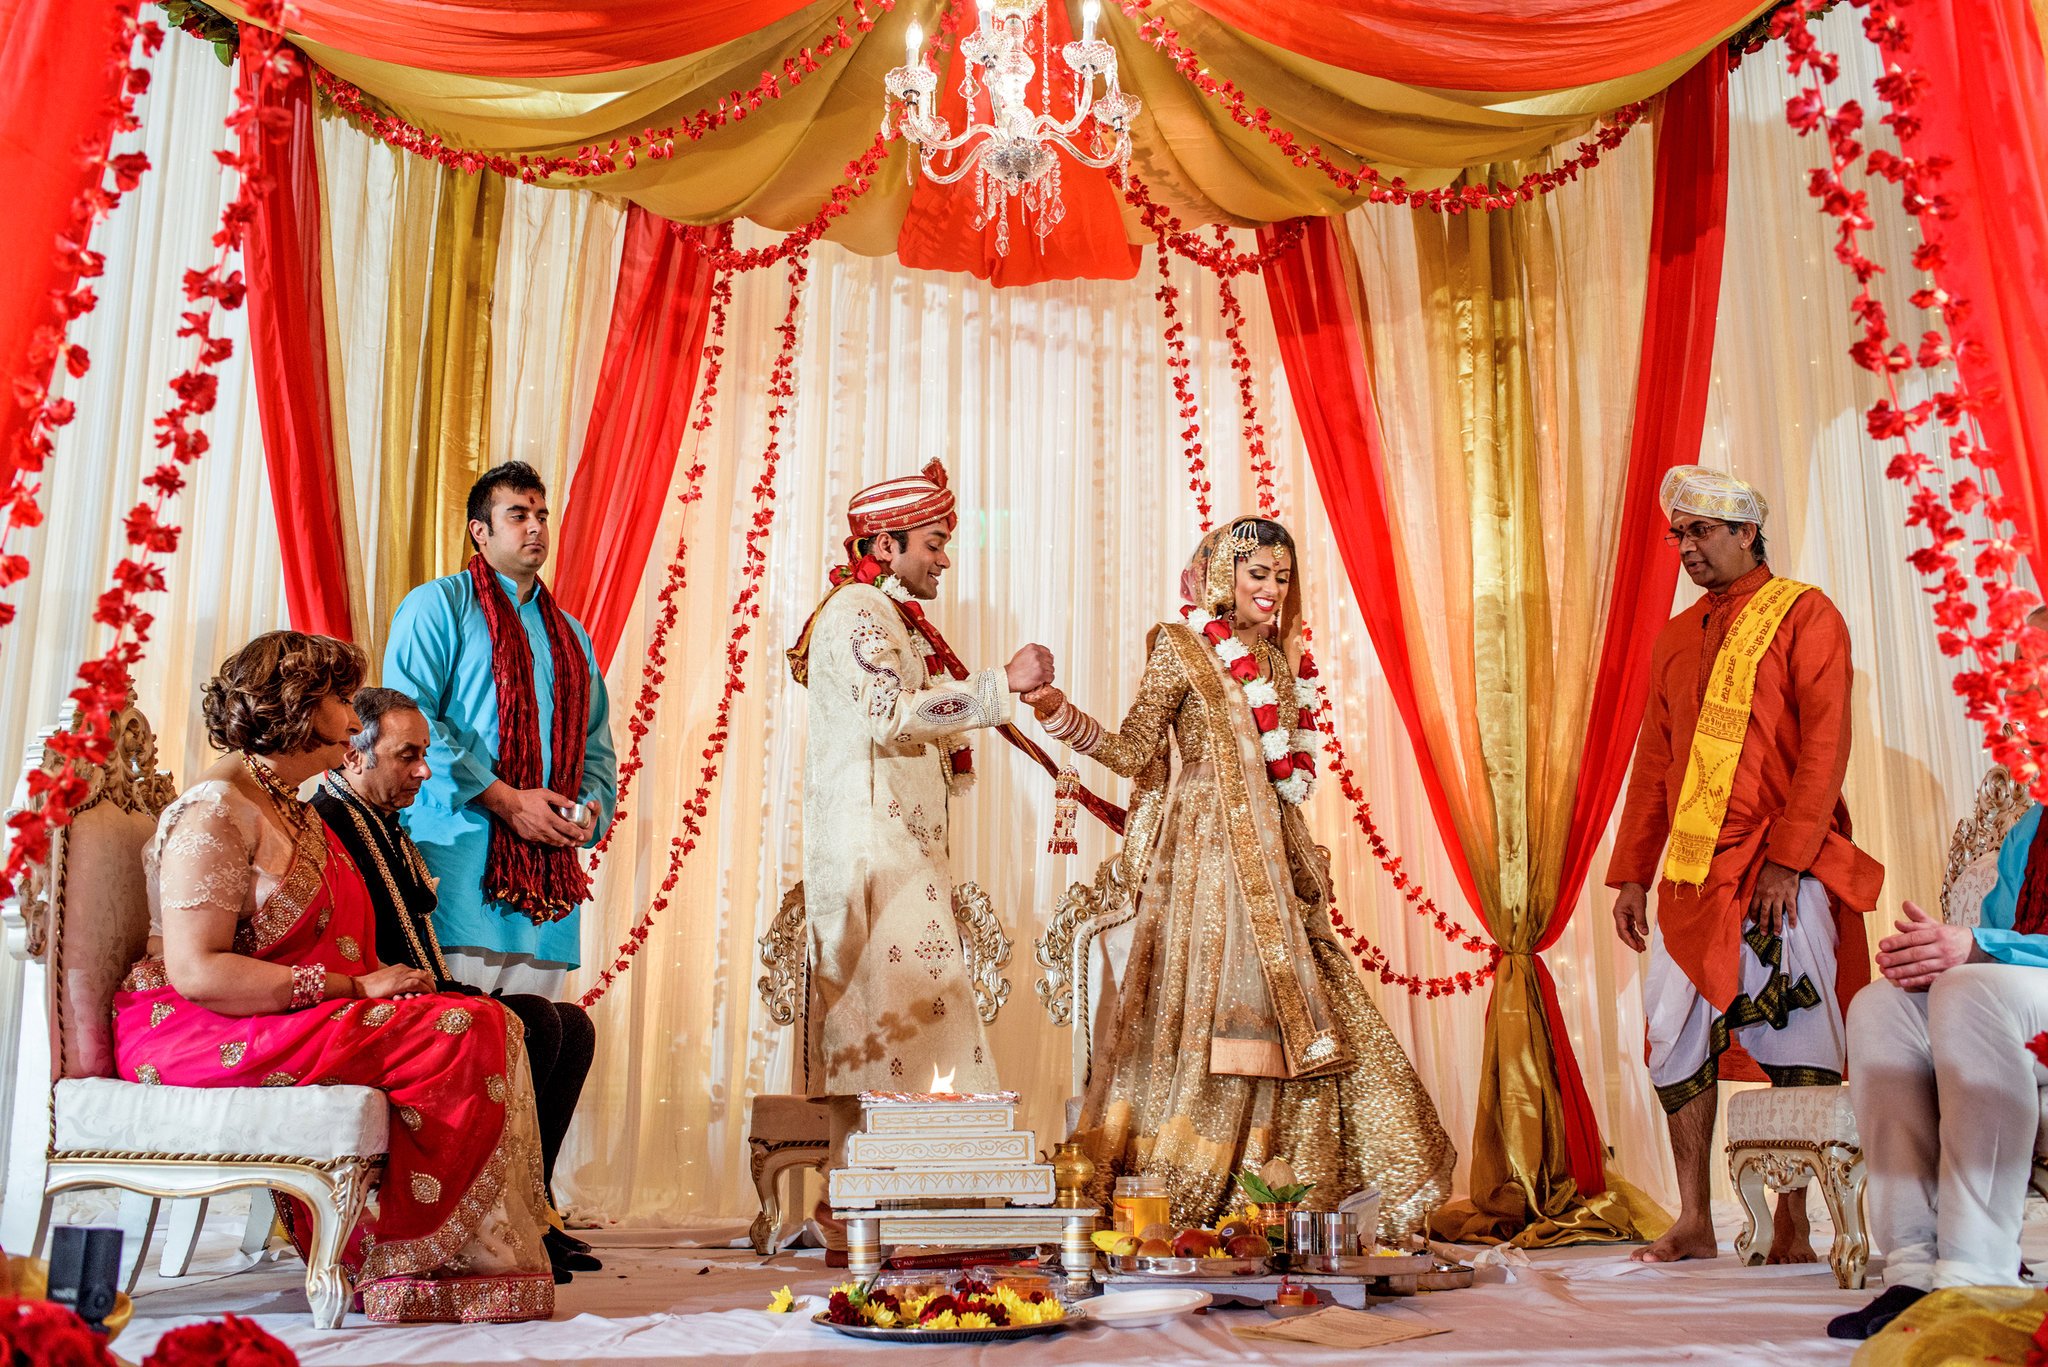 7 Vows of Hindu Marriage. 